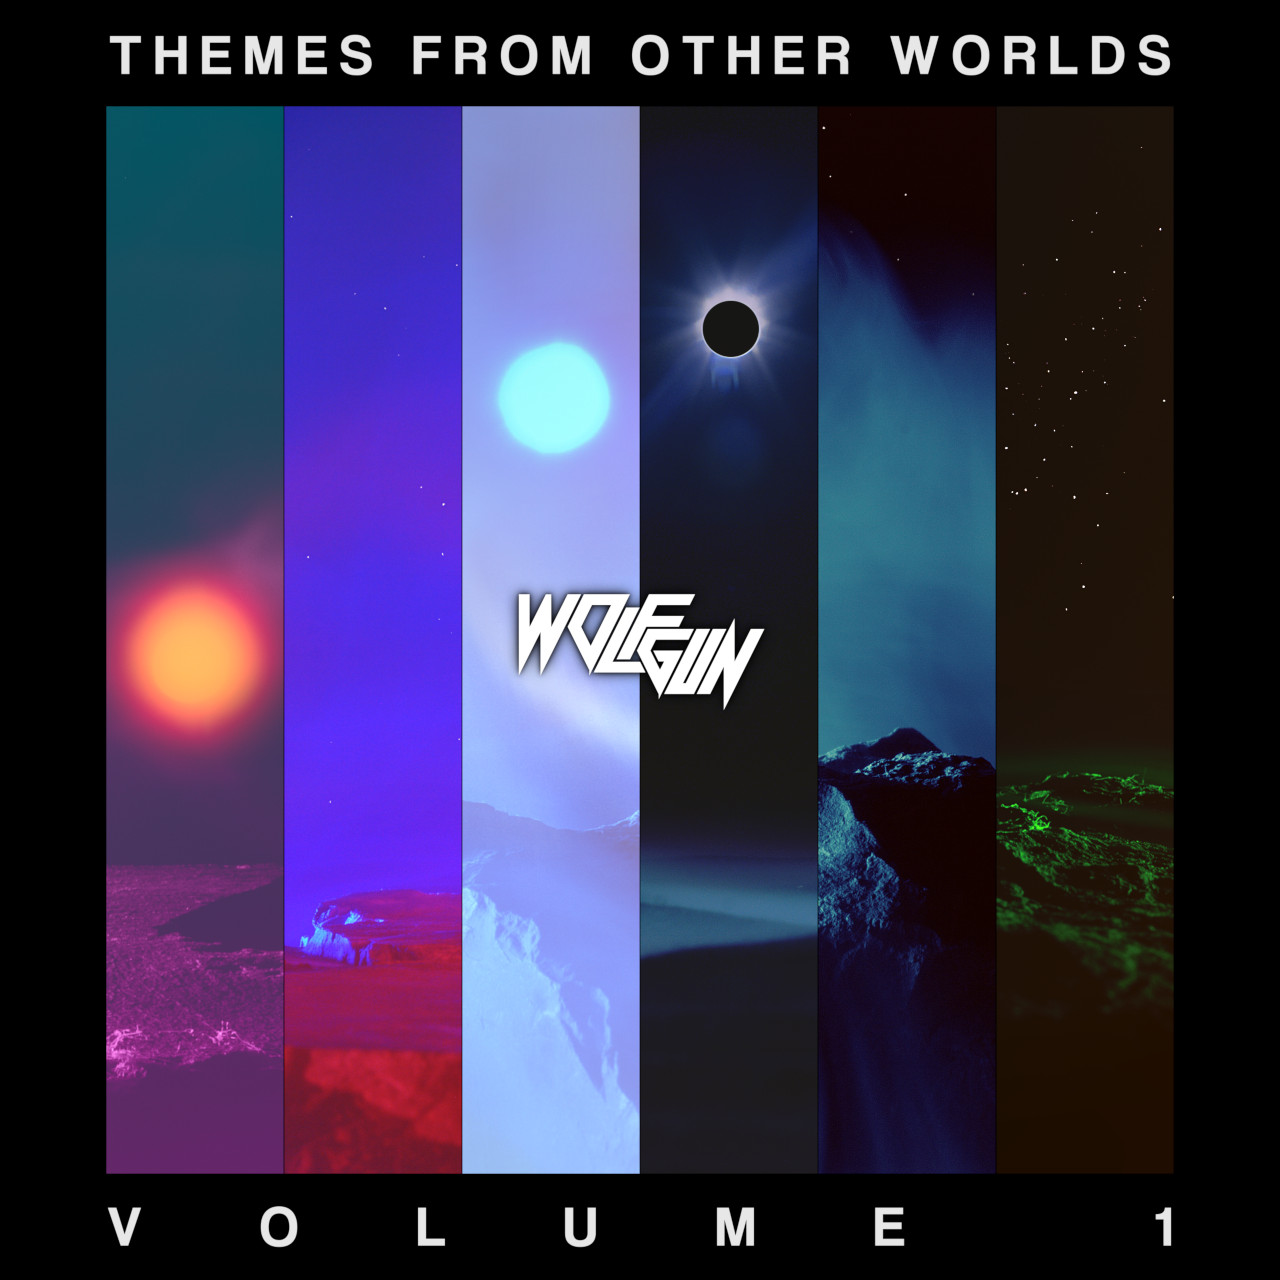 THEMES FROM OTHER WORLDS VOL. 1